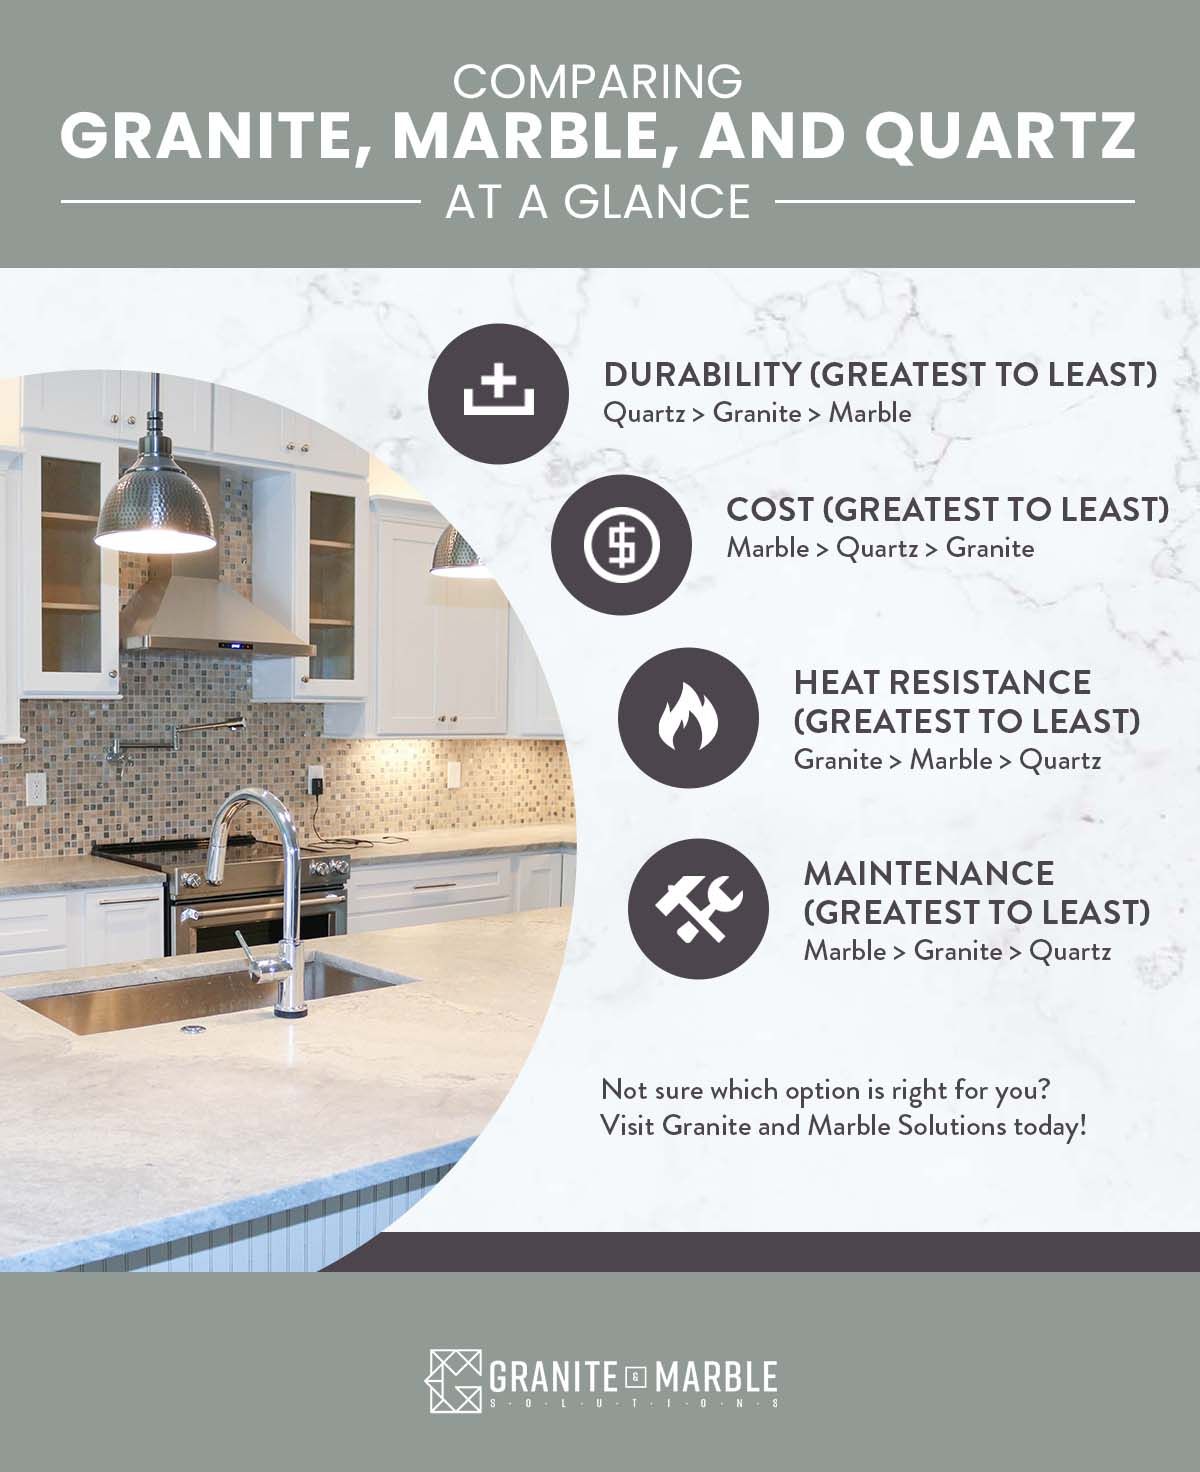 Comparing Granite, Marble, and Quartz At A Glance Infographic.jpg